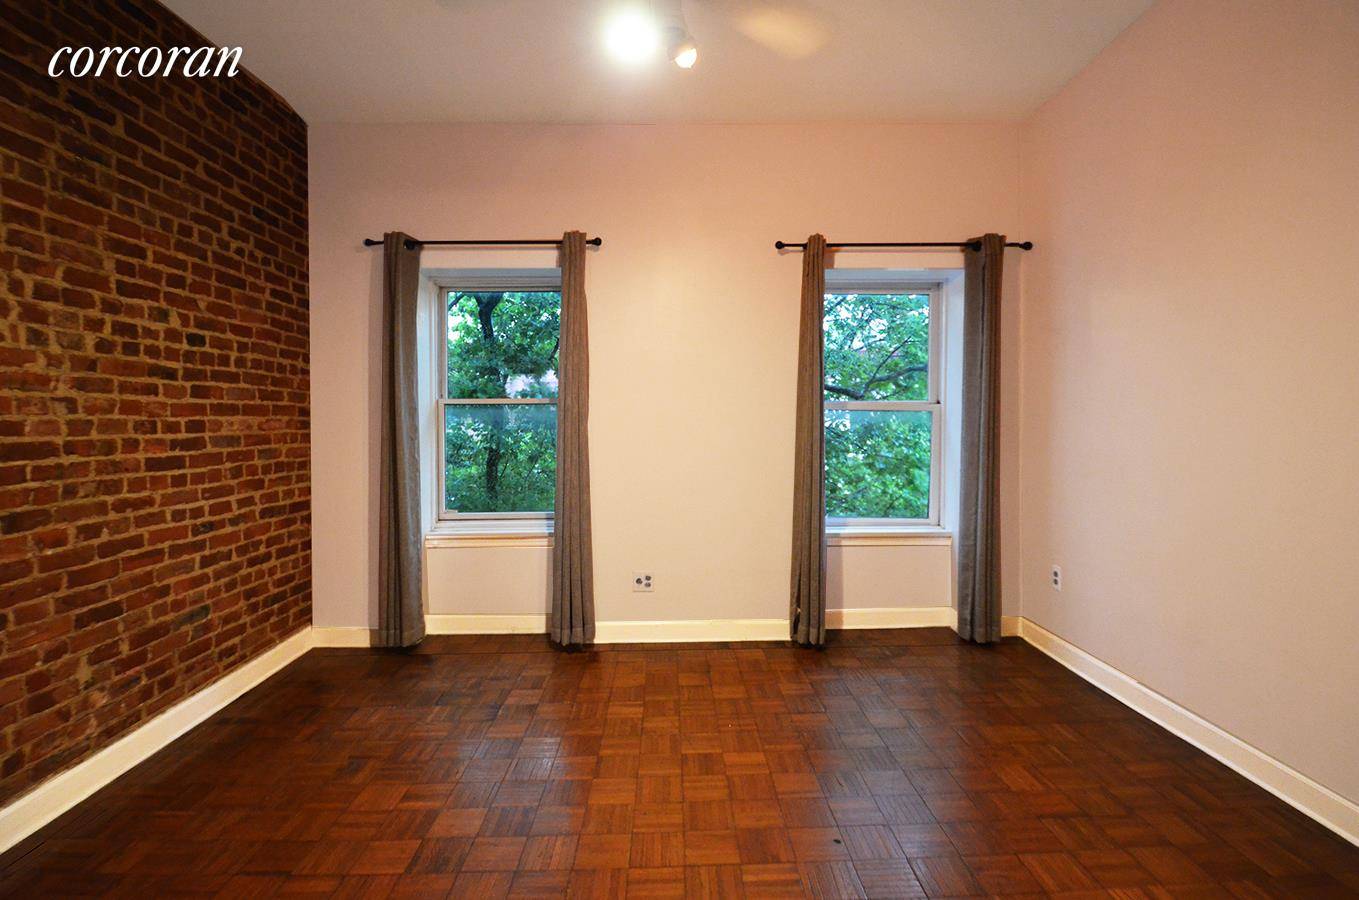 Settle into this charming one bedroom apartment in a beautiful historic Clinton Hill.